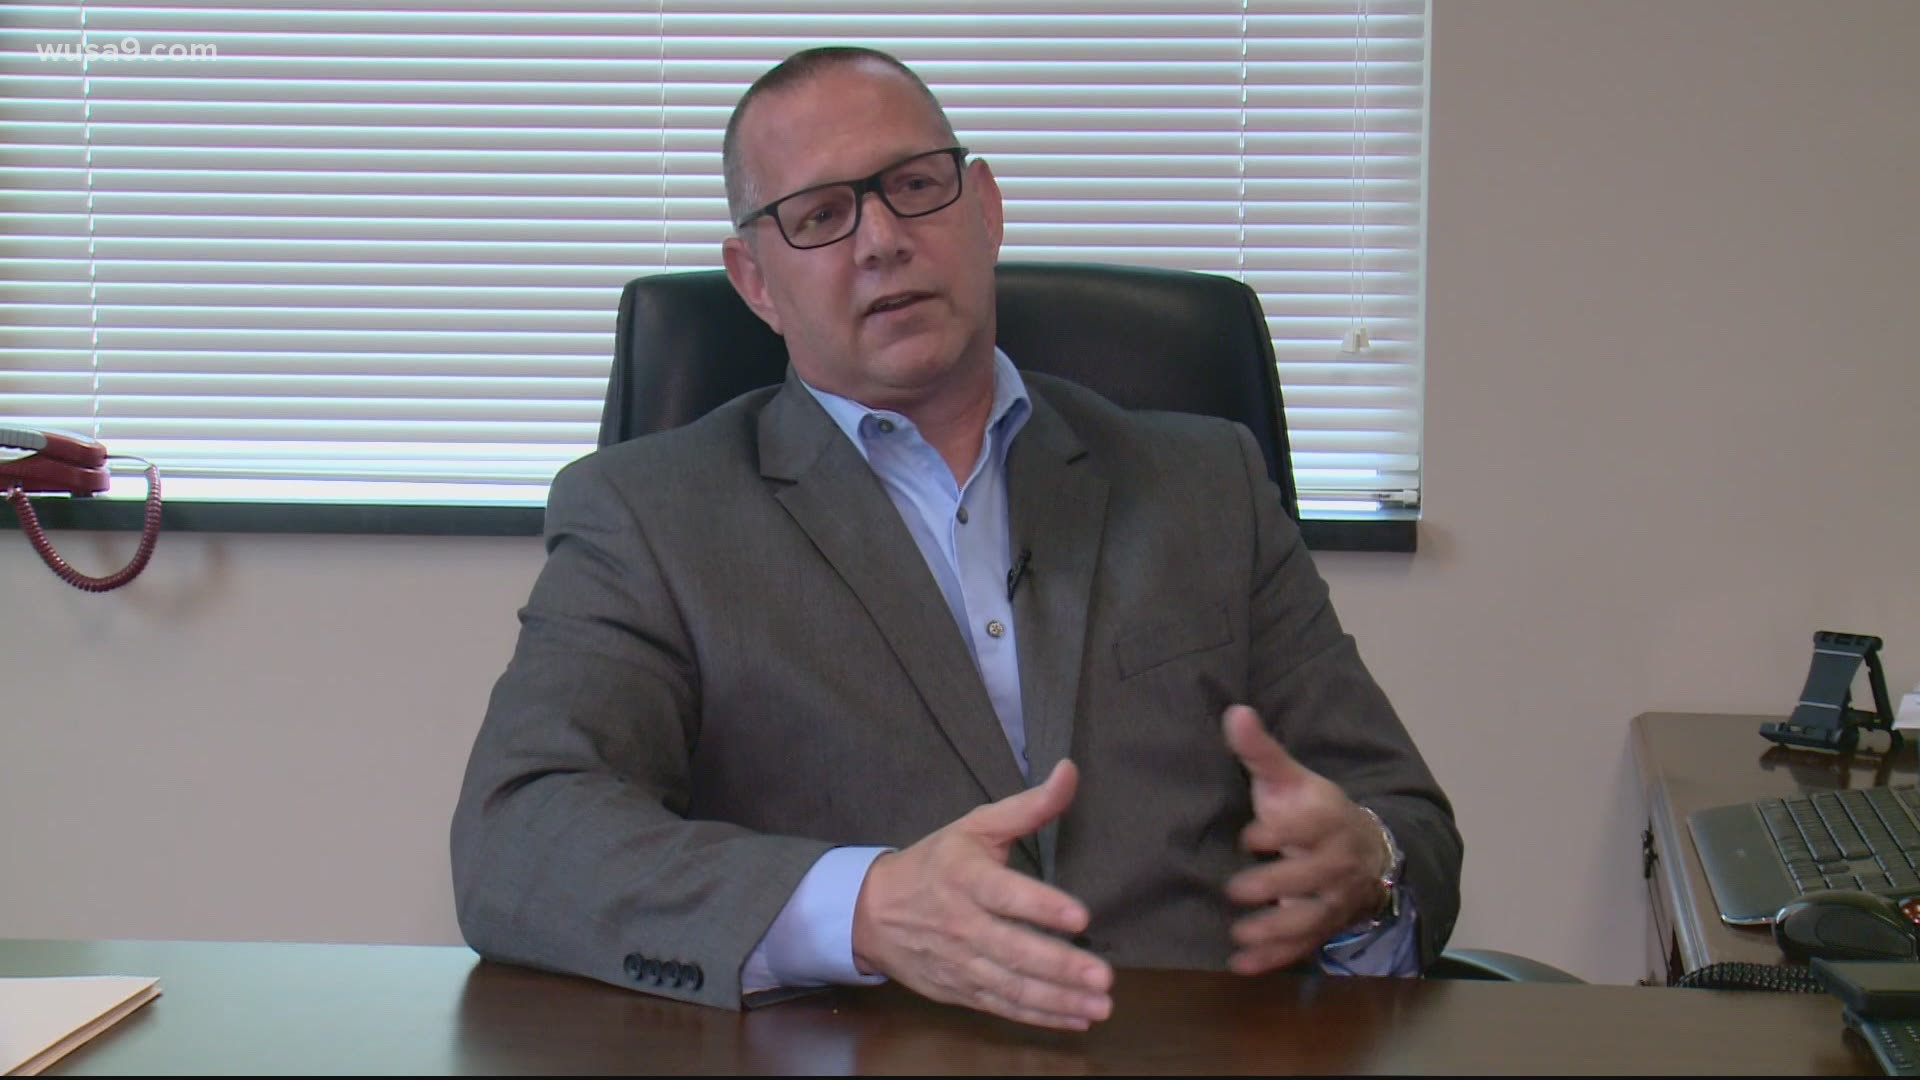 In a sit down interview with the new LCPS superintendent Dr. Scott Ziegler, he talks about the current tension in the school system